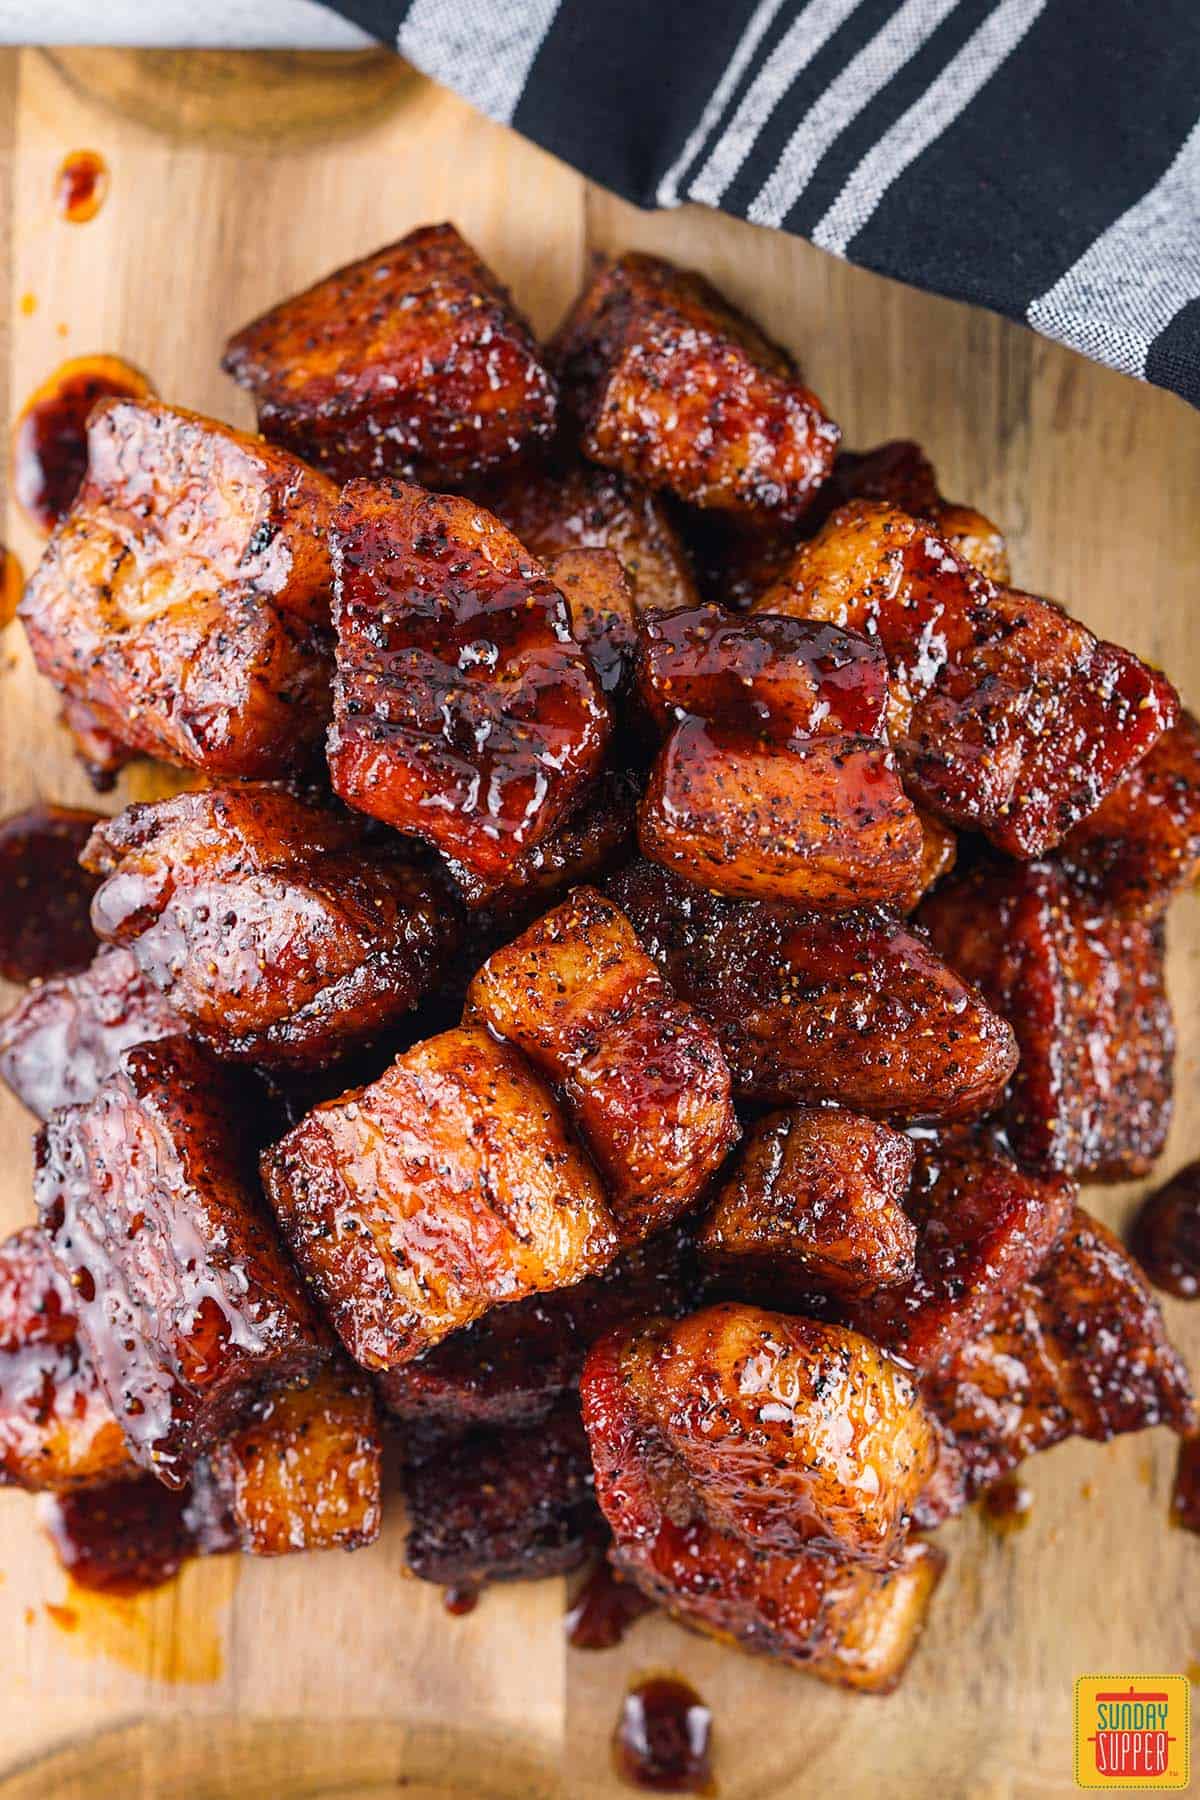 pile of smoked pork belly burnt ends ready to eat